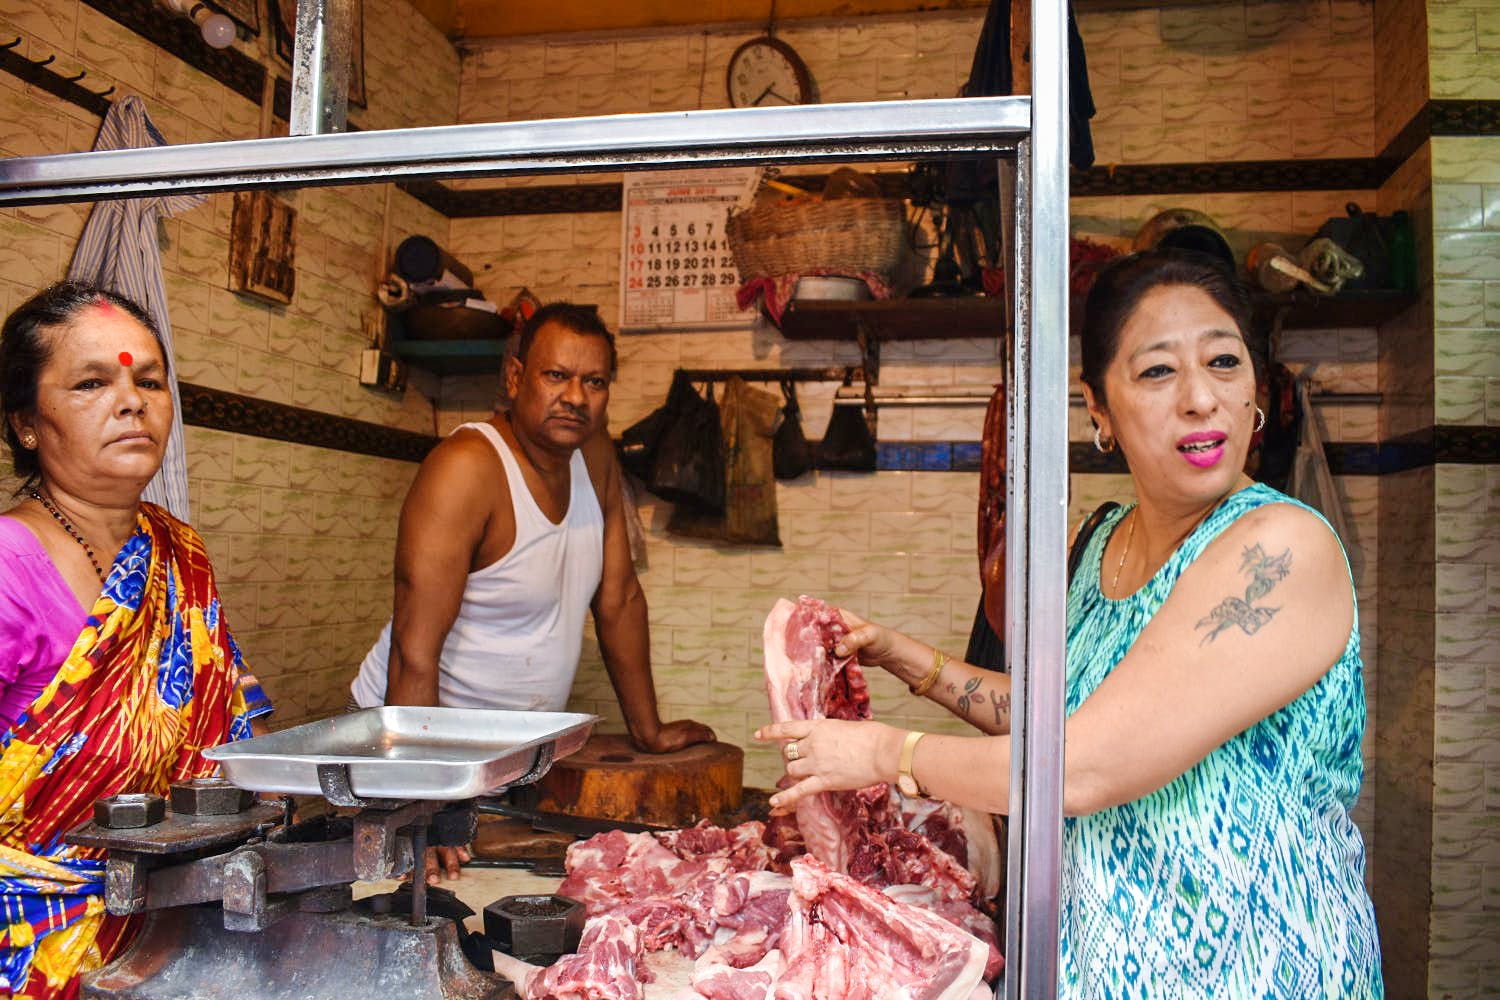 Food,Butcher,Temple,Street food,Selling,Flesh,Meat,Vacation,Cuisine